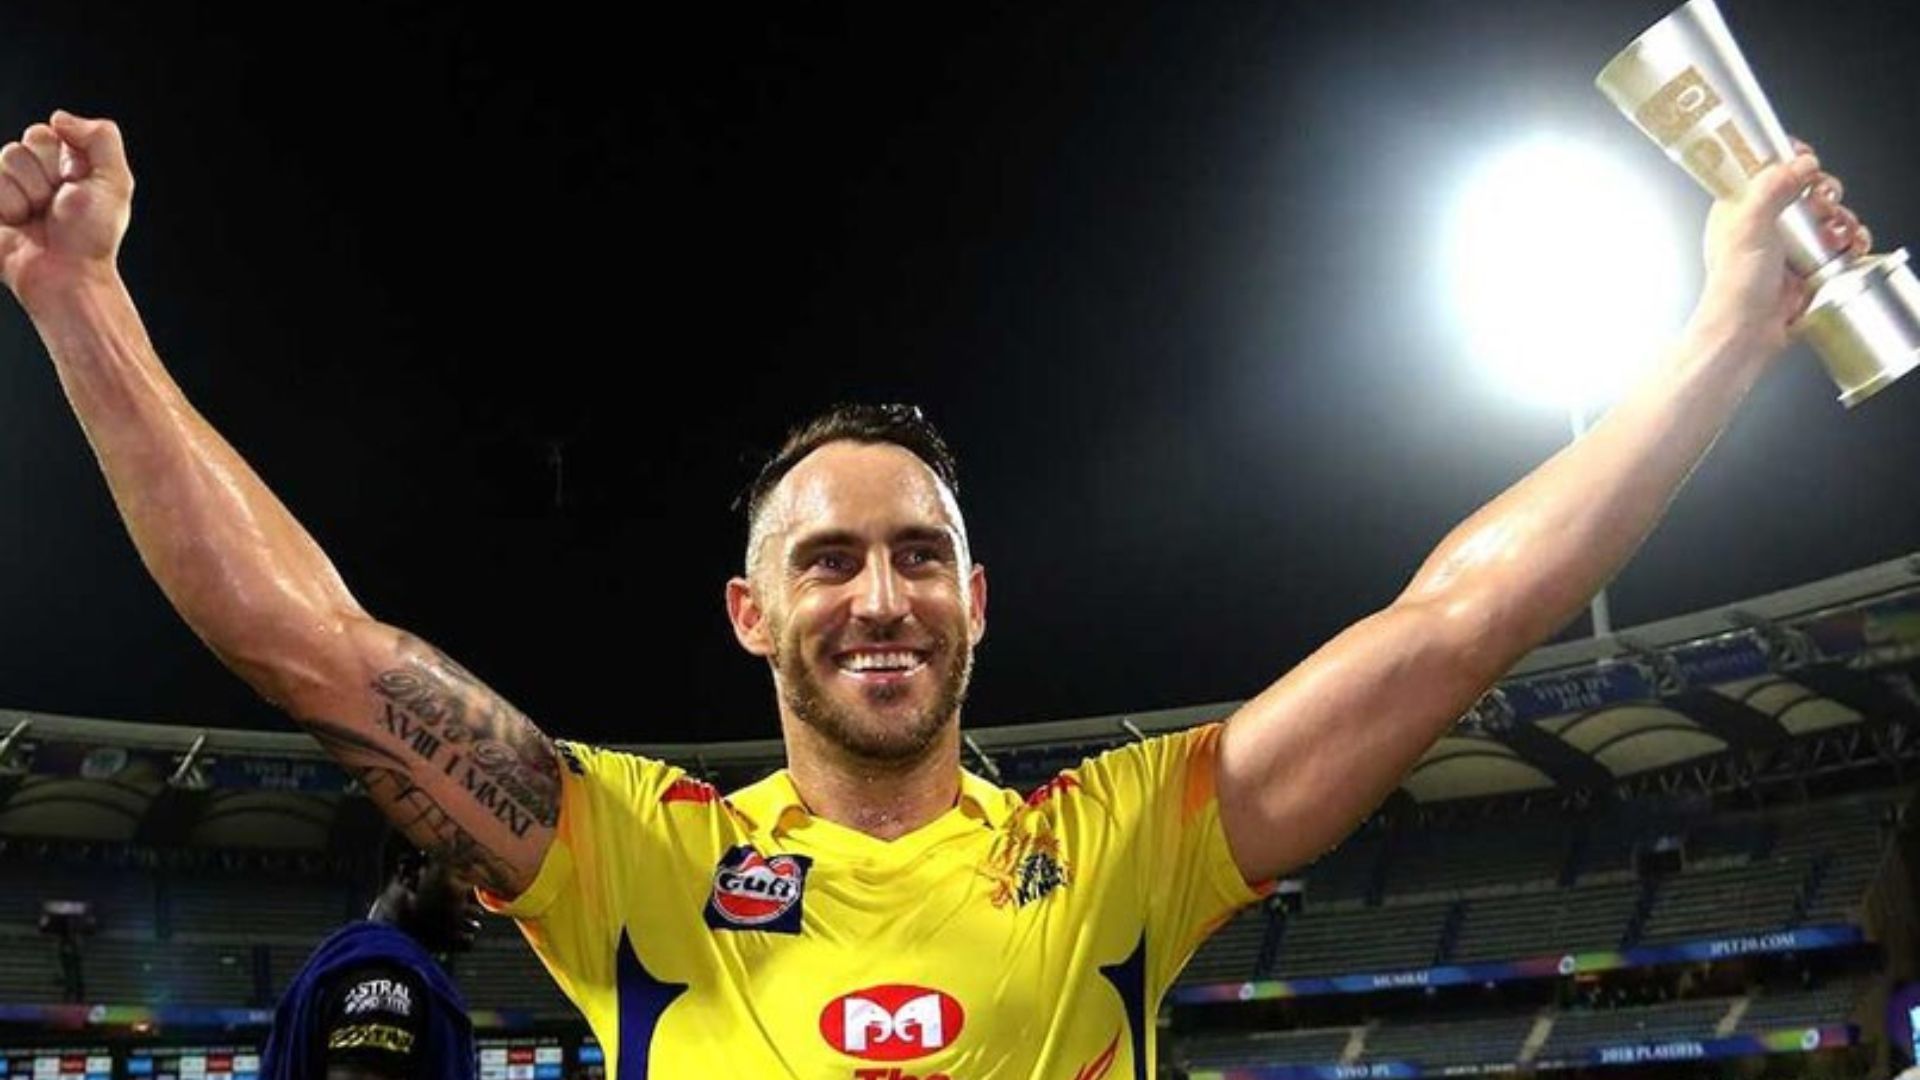 Faf du Plessis has played some outstanding knocks for CSK under pressure (P.C.:Twitter)